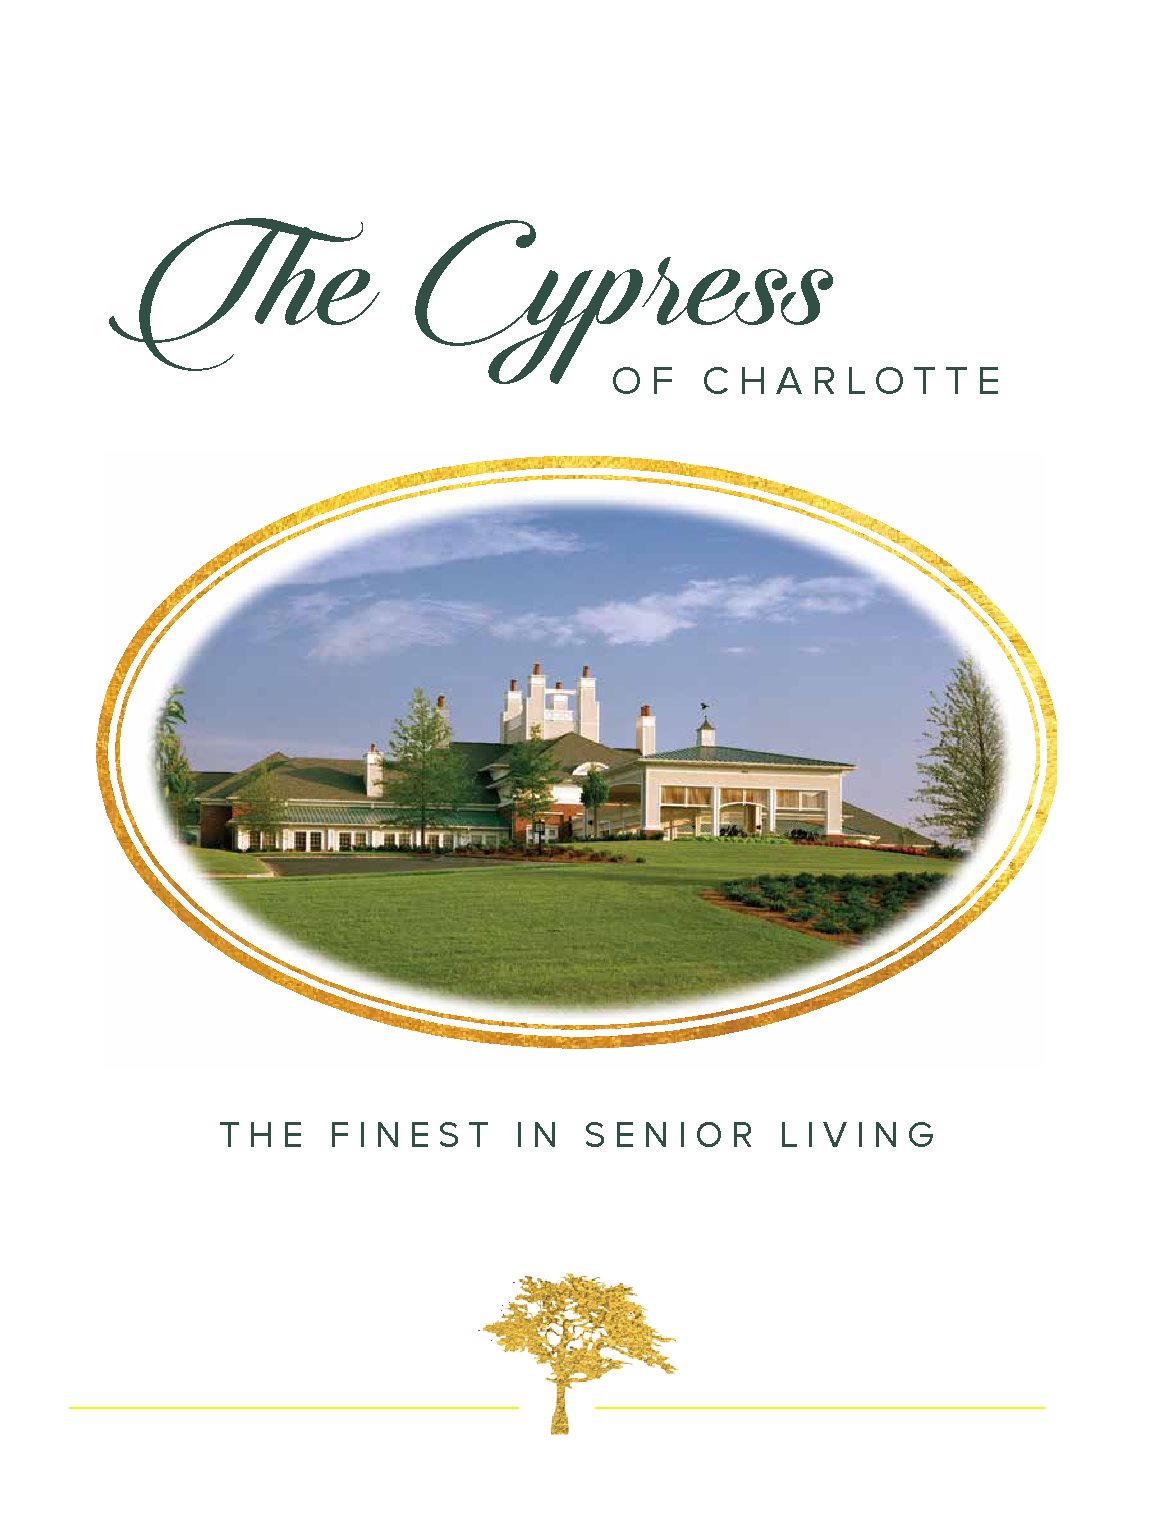 The Cypress Group | Doggett Advertising